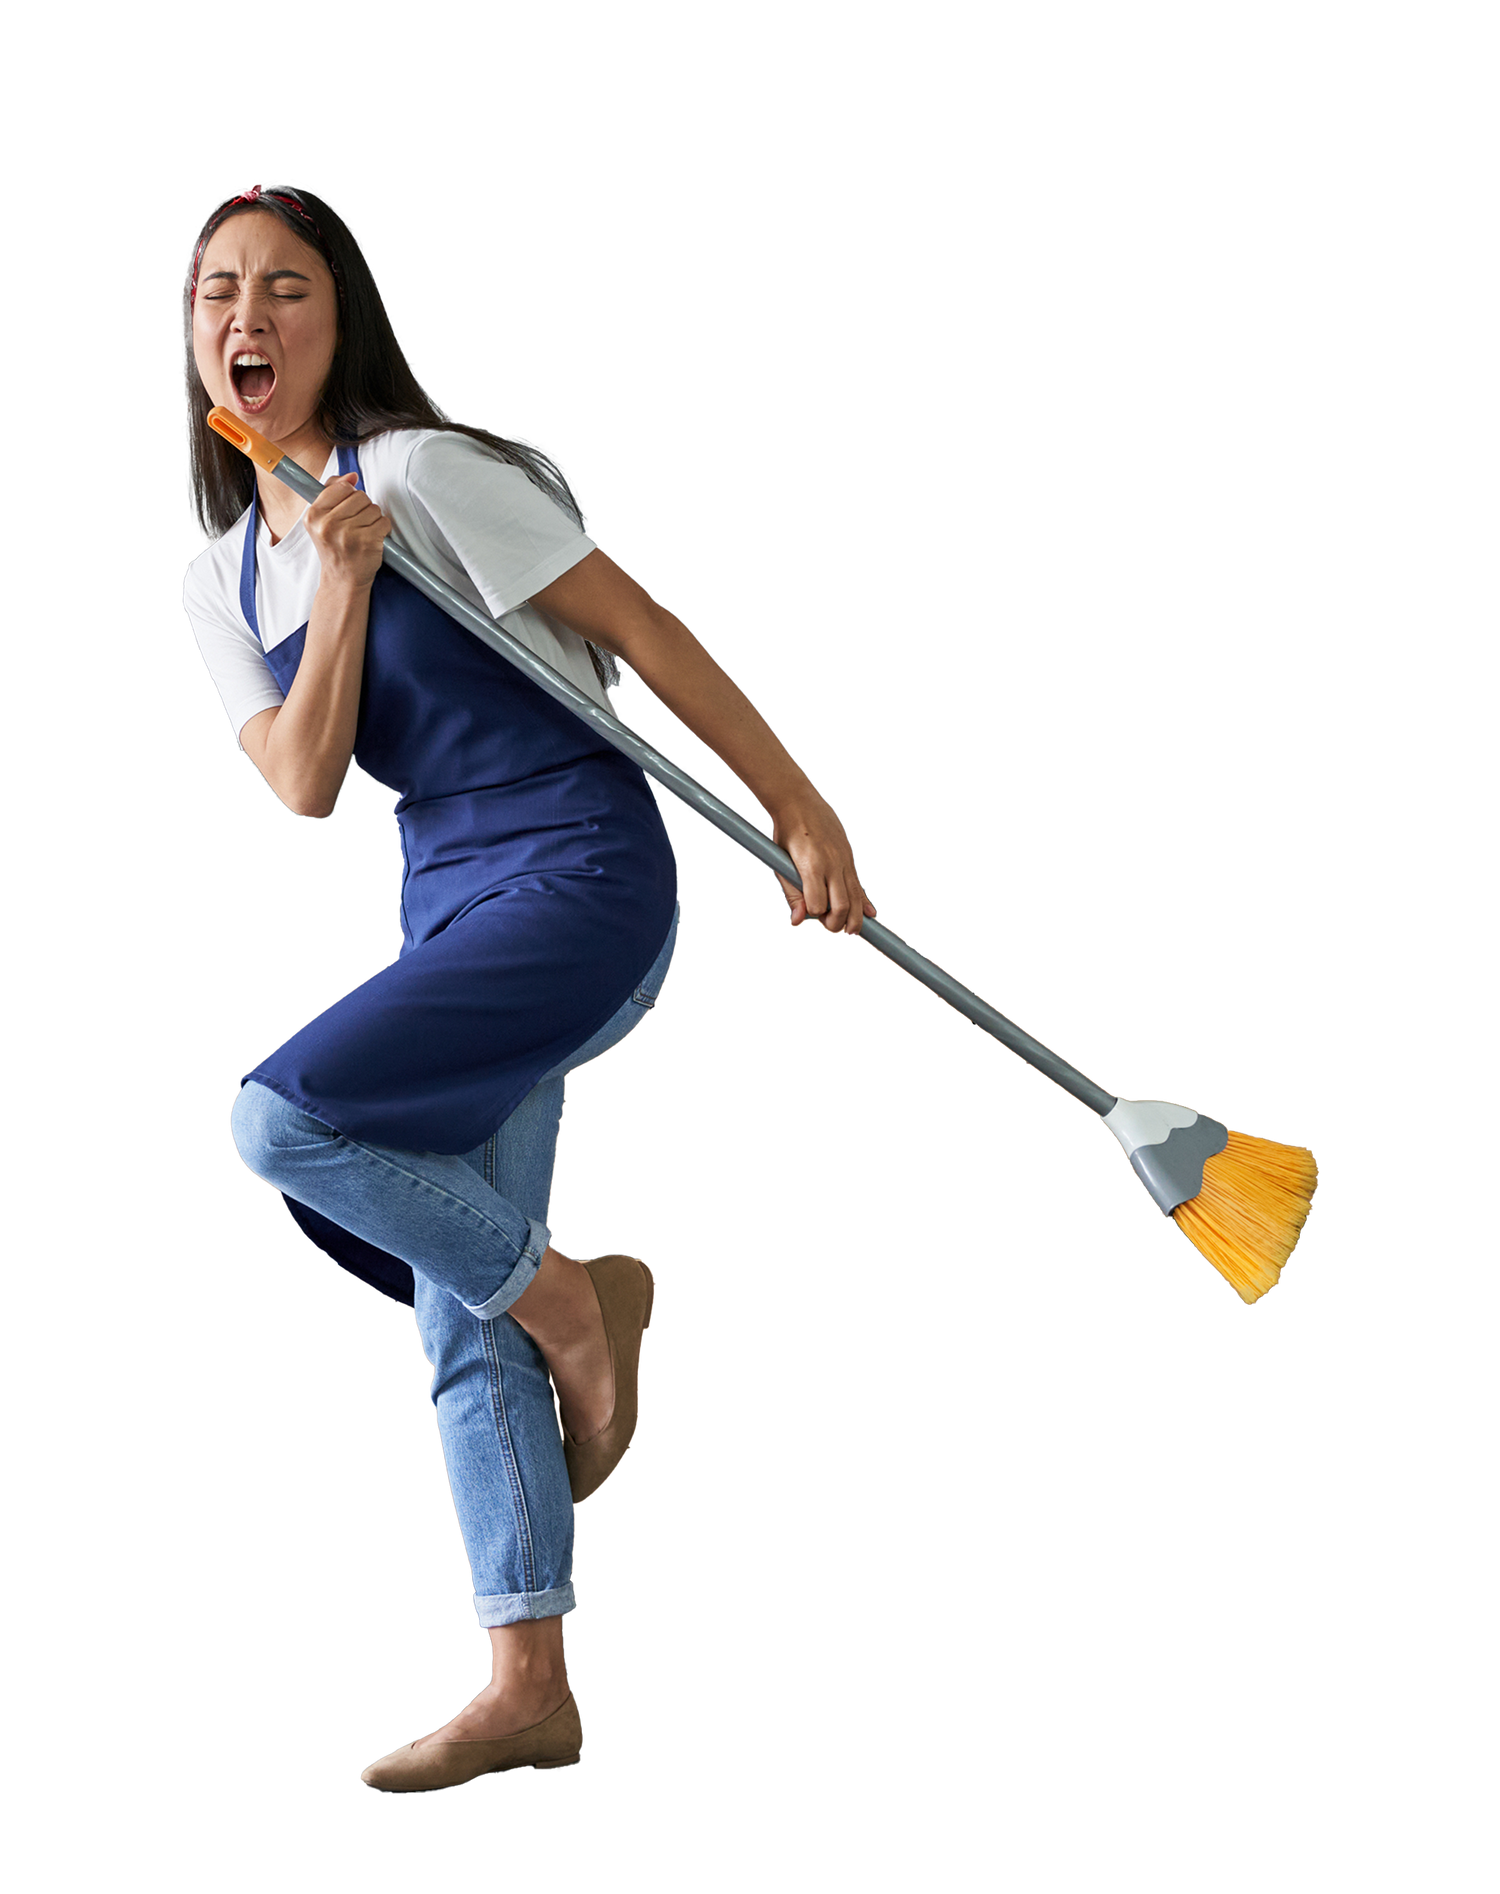 a lady with a broom cleaning home, singing, happy, refreshing her home.